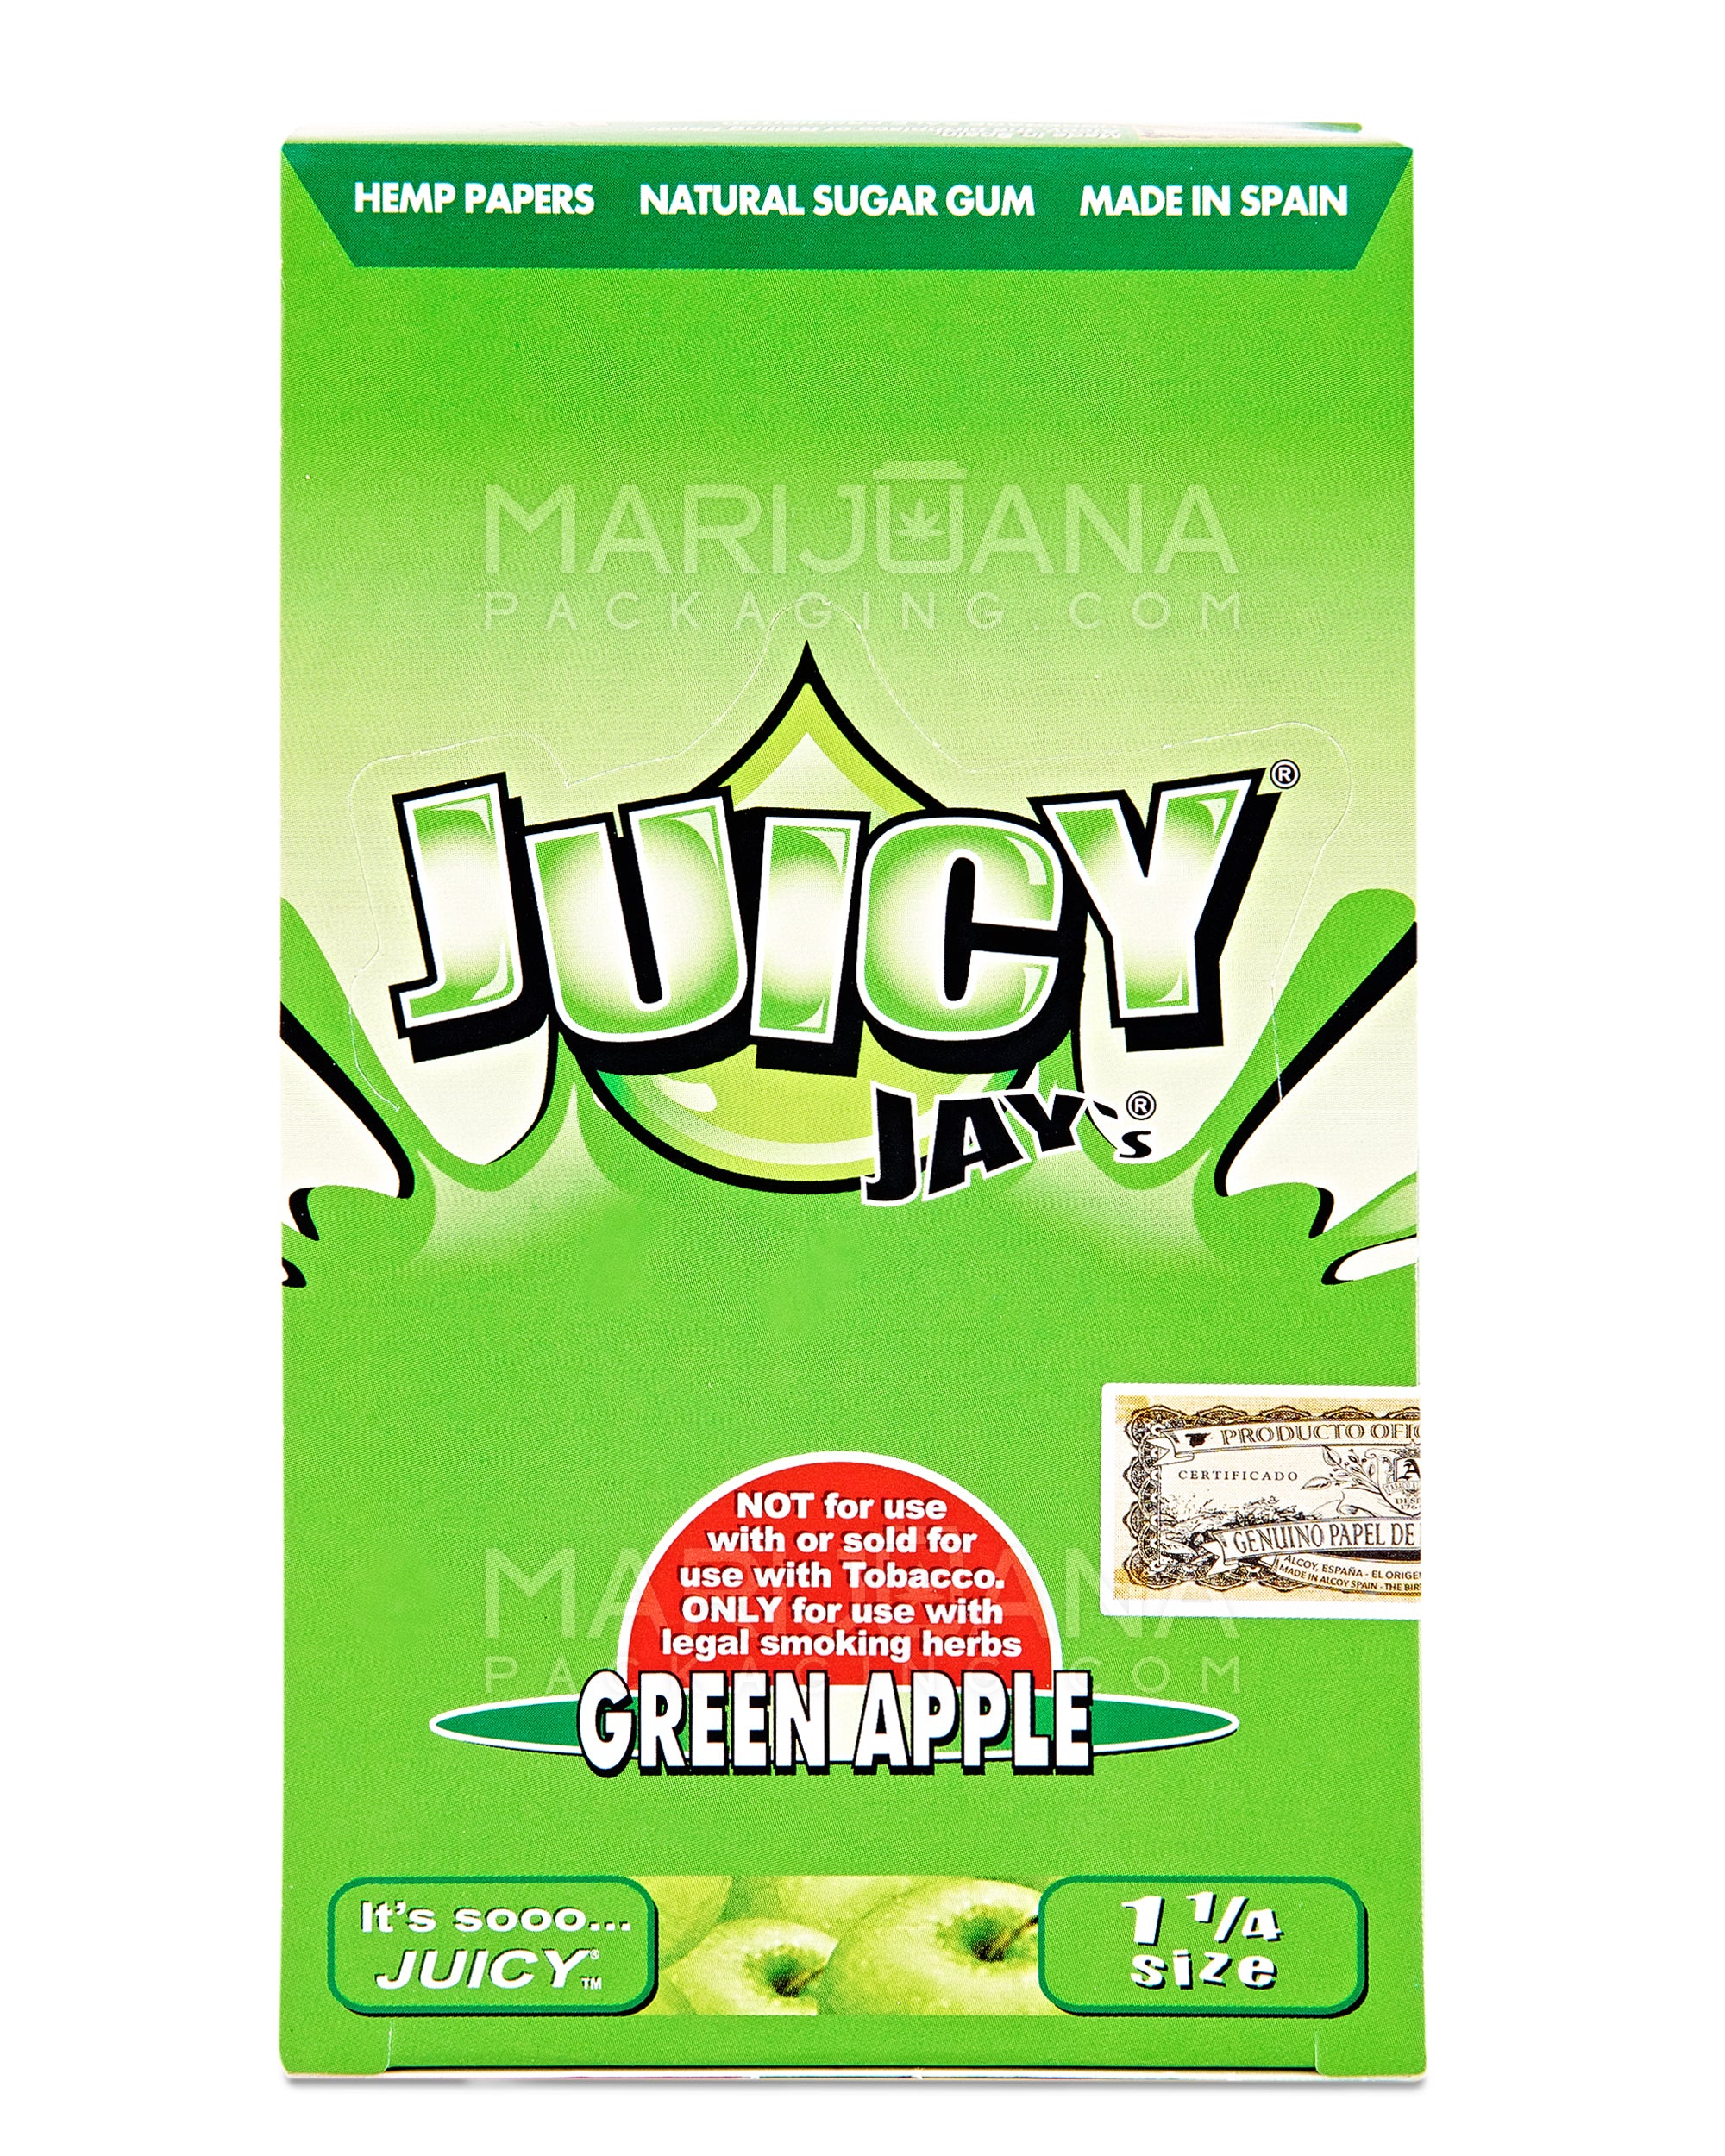 JUICY JAY'S | 'Retail Display' 1 1/4 Size Hemp Rolling Papers | 76mm - Green Apple - 24 Count - 4